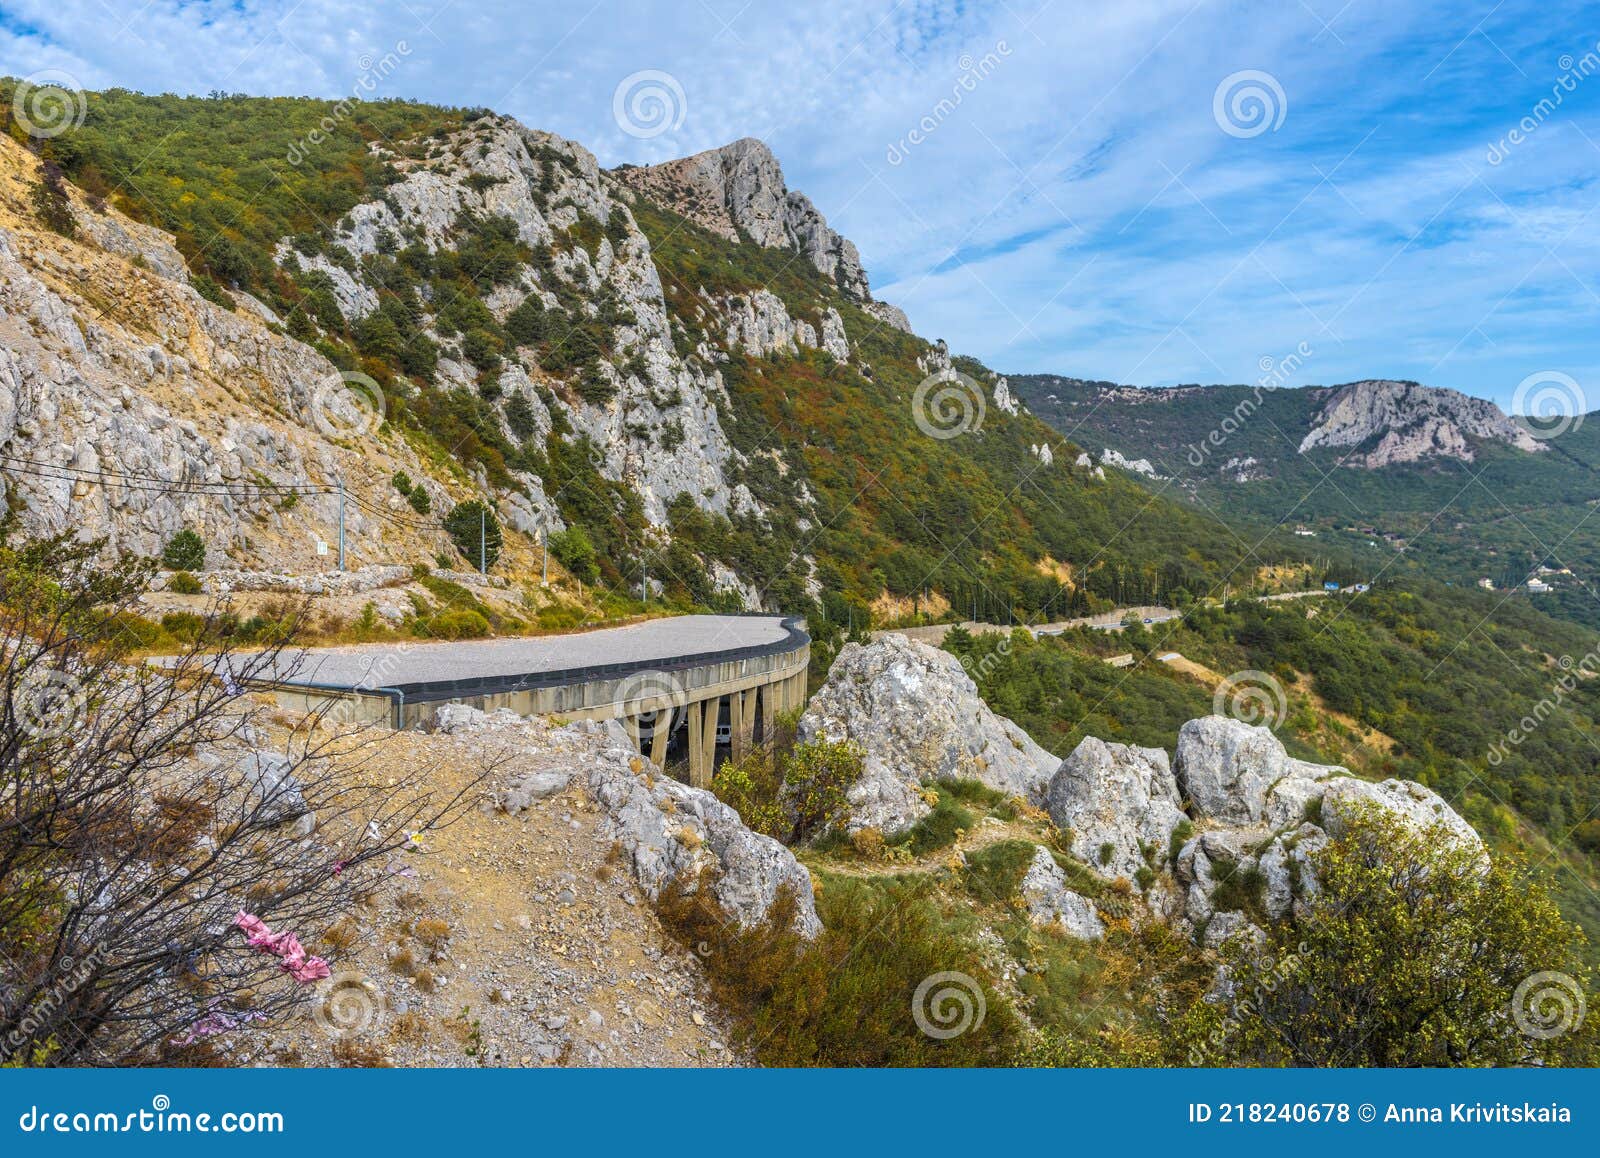 laspi mountain pass, view of tunnel and garin mikhailovsky cliff